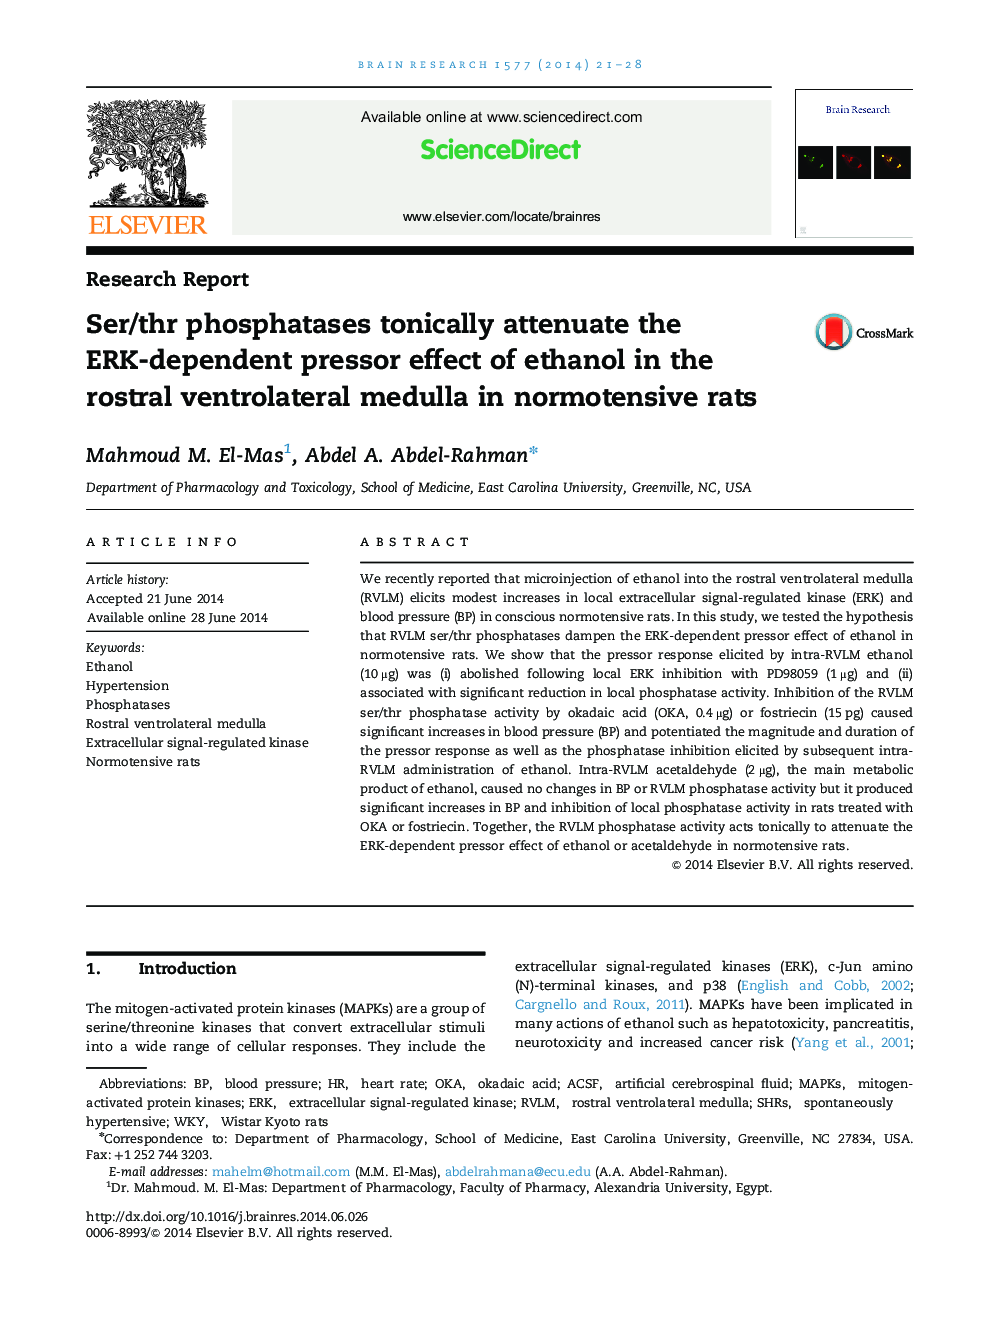 Research ReportSer/thr phosphatases tonically attenuate the ERK-dependent pressor effect of ethanol in the rostral ventrolateral medulla in normotensive rats